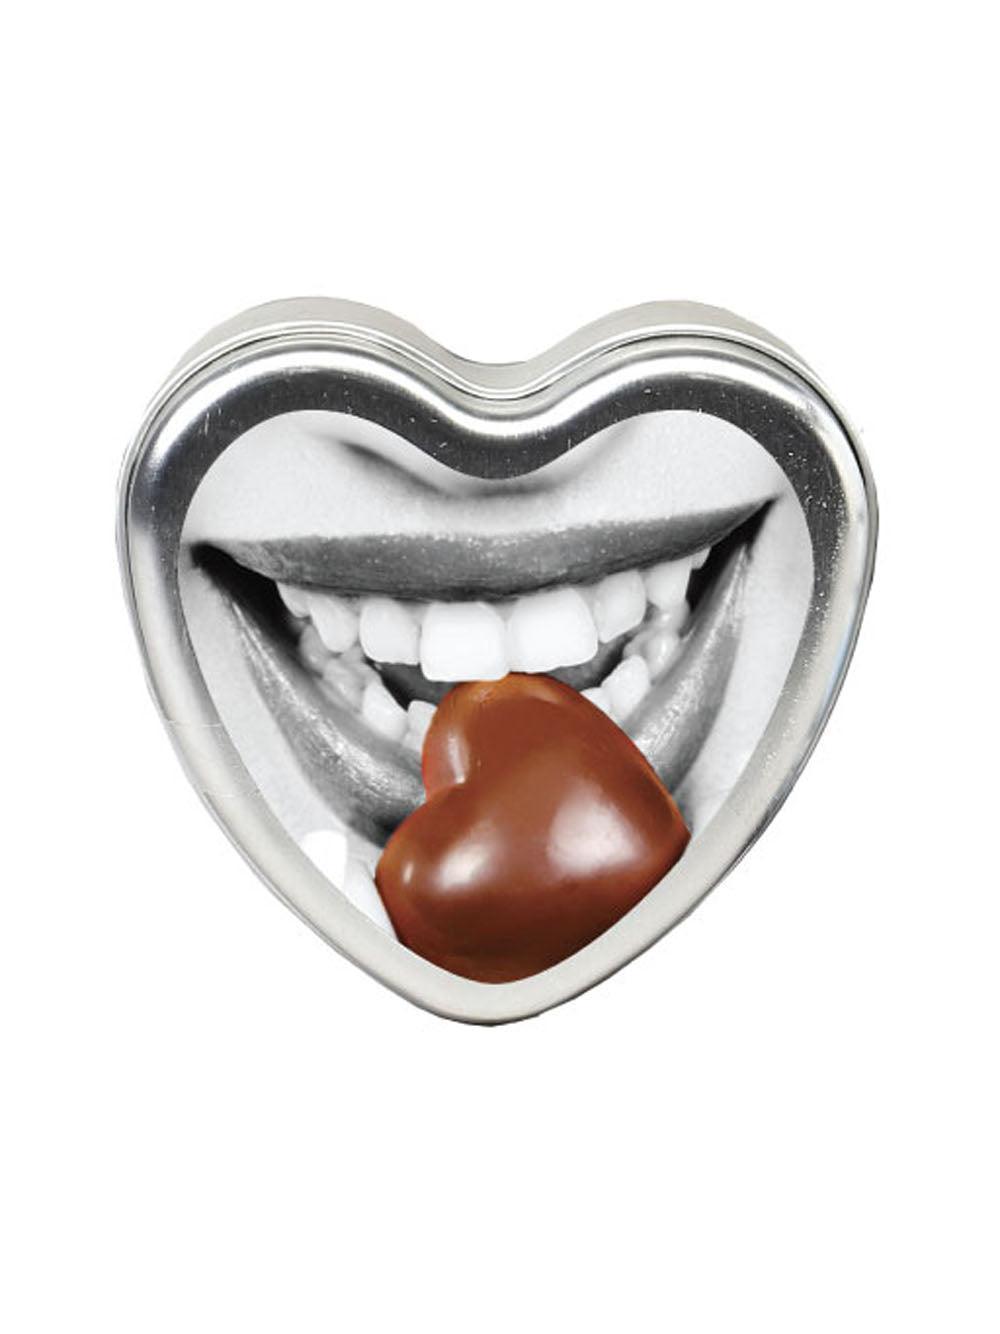 Edible Heart Candle- Chocolate - 4 Oz. - My Sex Toy Hub